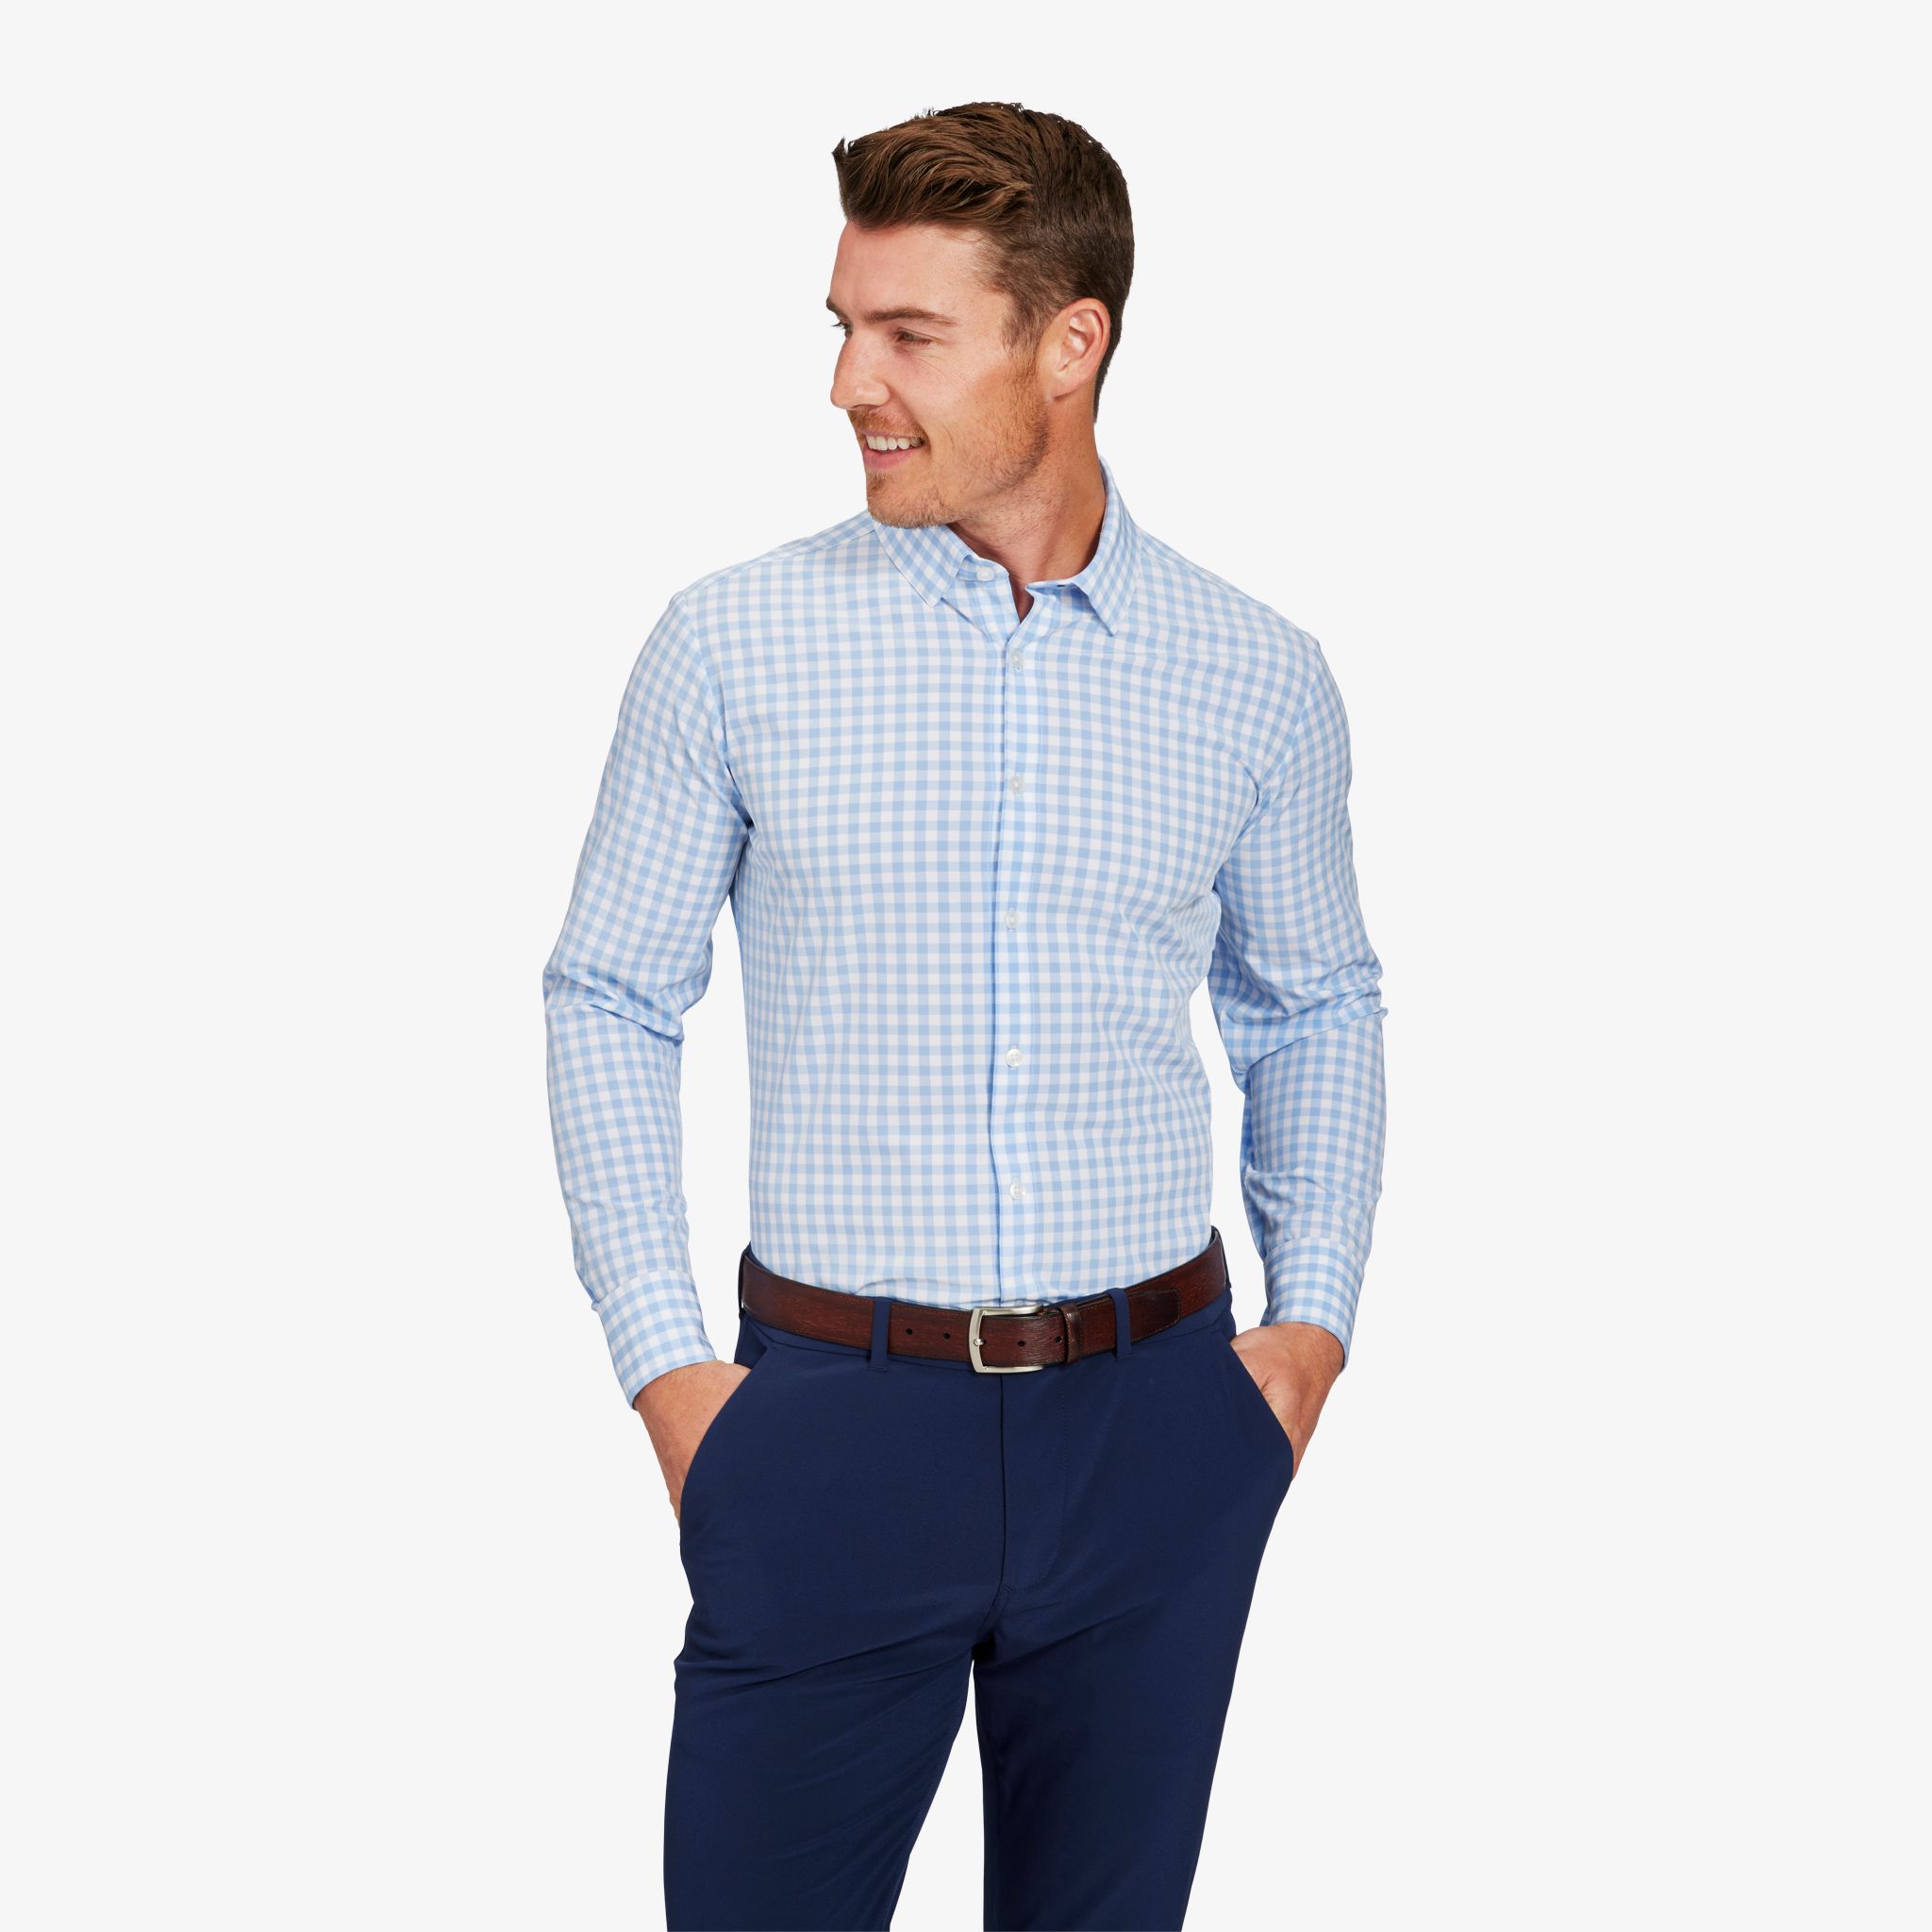 What color shirt goes well with white pants for men? - Quora